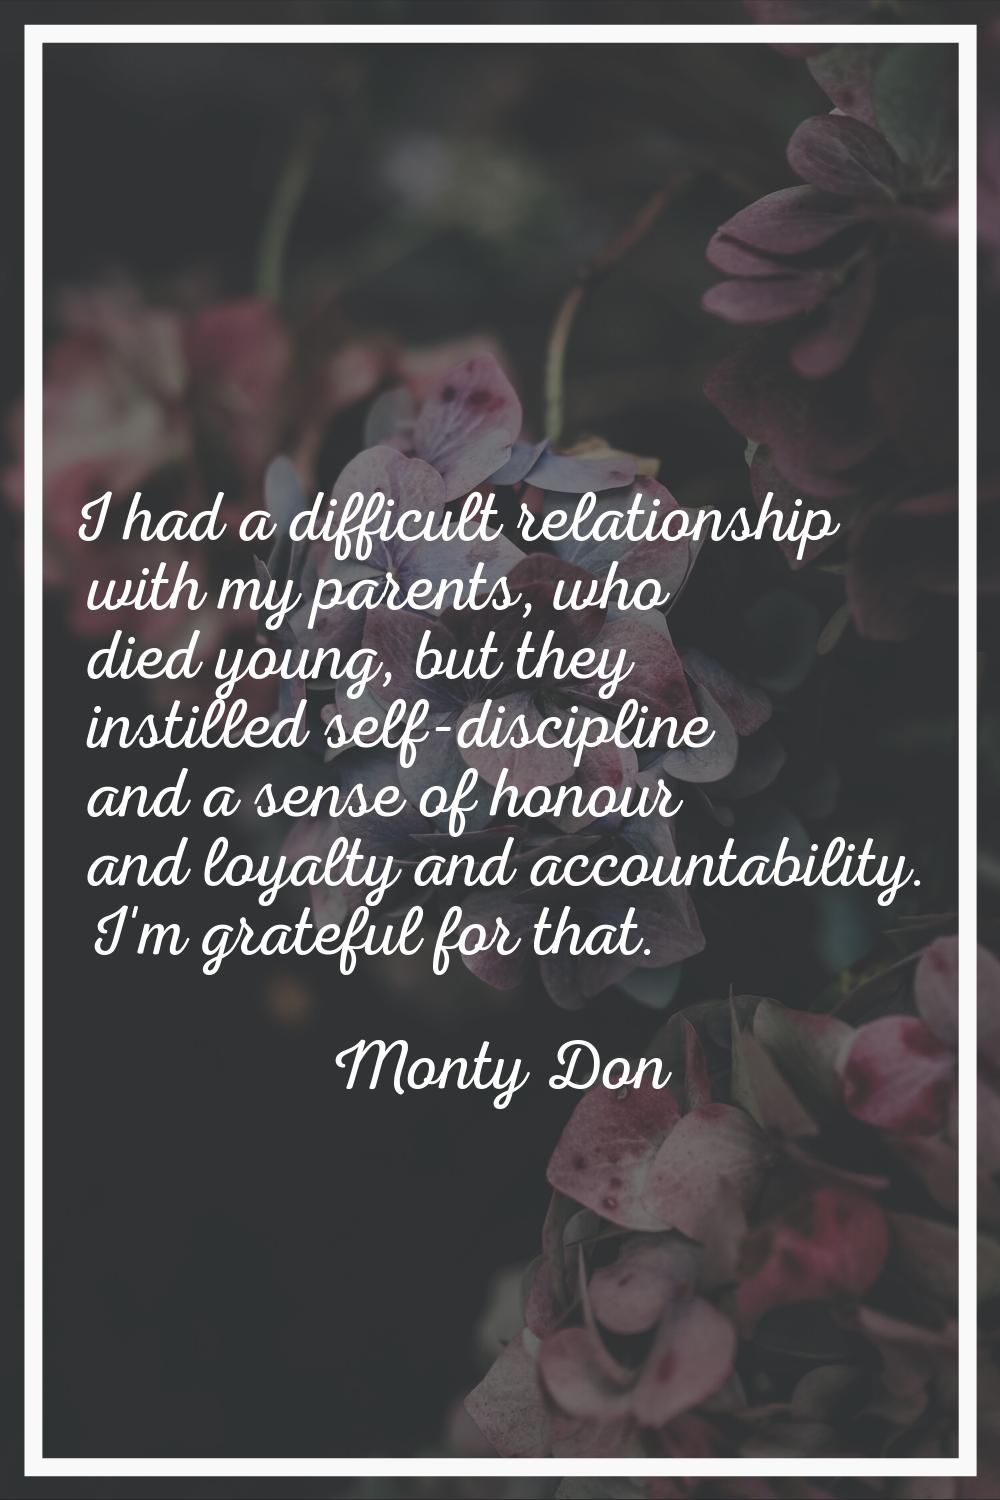 I had a difficult relationship with my parents, who died young, but they instilled self-discipline 